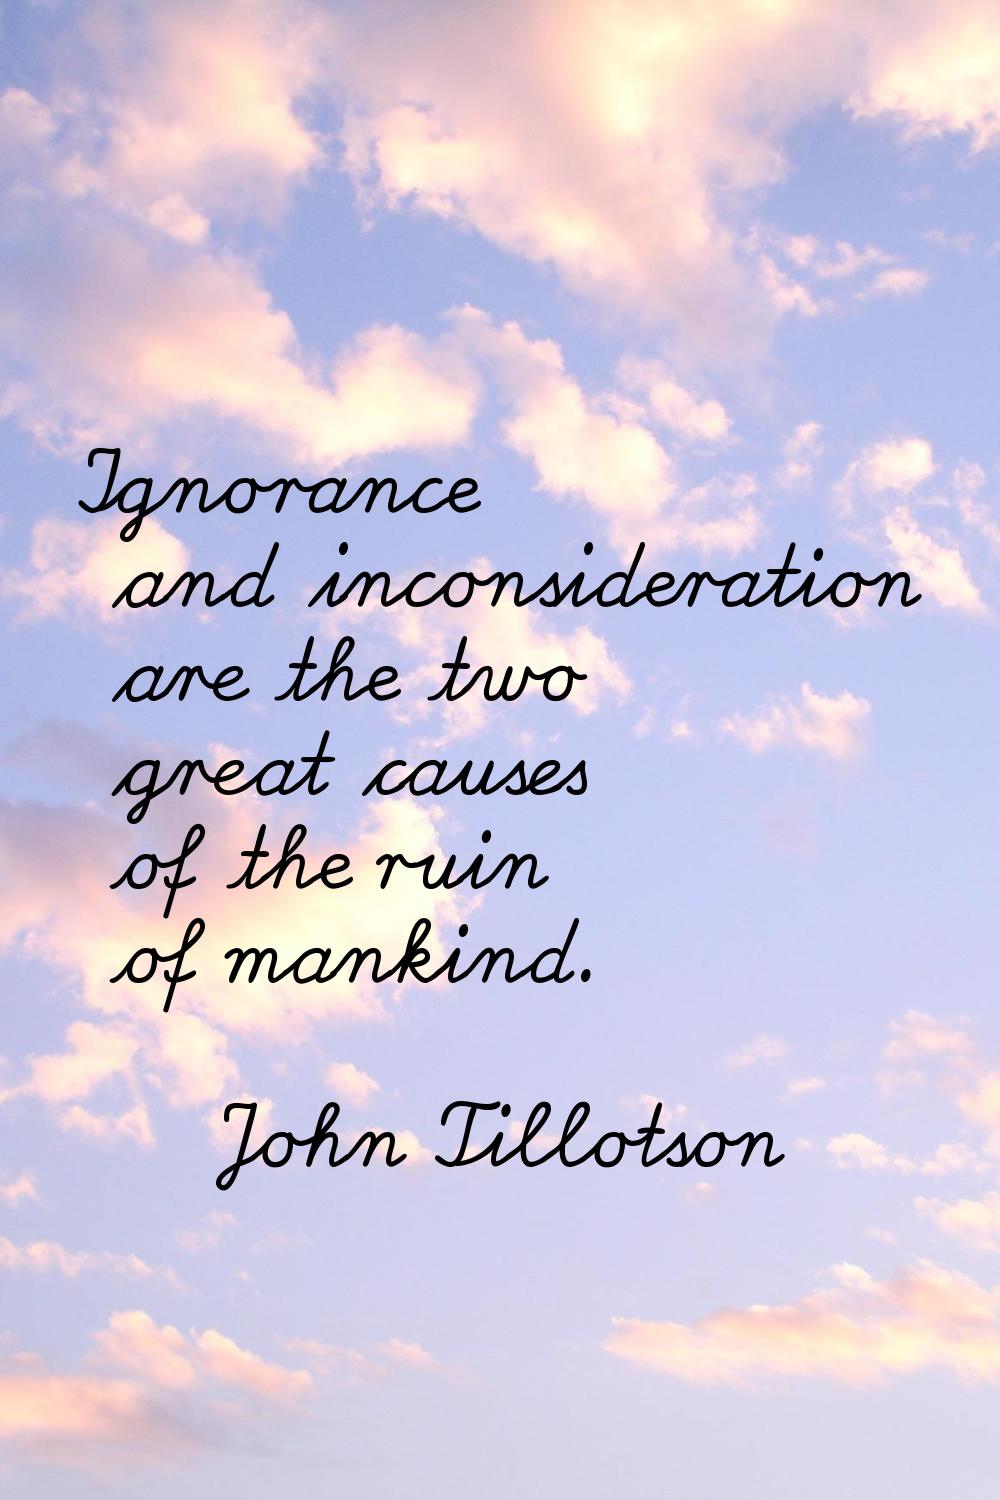 Ignorance and inconsideration are the two great causes of the ruin of mankind.